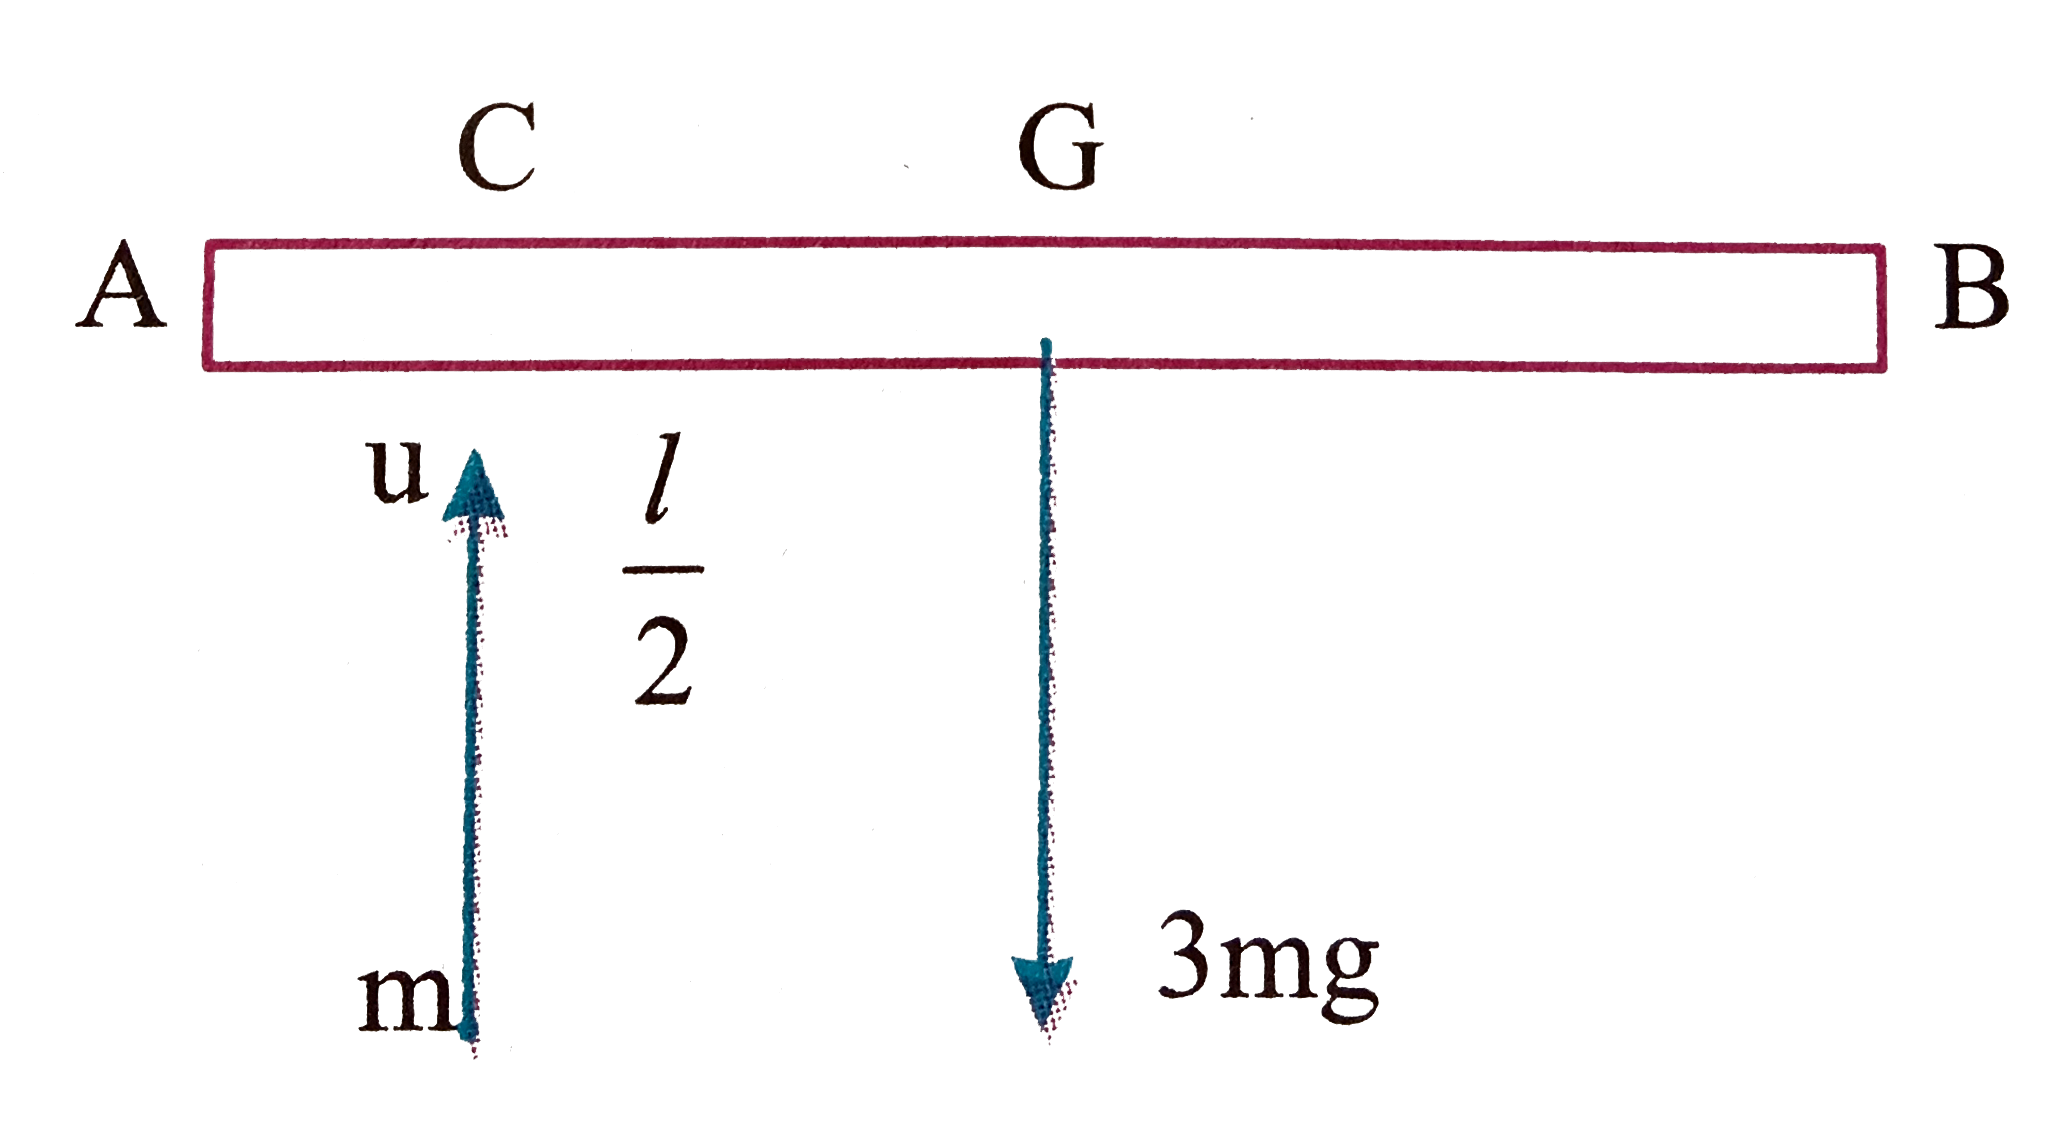 A rod AB of mass 3m and length 4a is falling freely in a horizontal position and c is a point distance a from A. When the speed of the rod is u, the point c collides with a particle of mass m which is moving vertically upwards with speed u. if the impact between the particle and the rod is perfectely elastic find       The speed of B immediately after the impact is